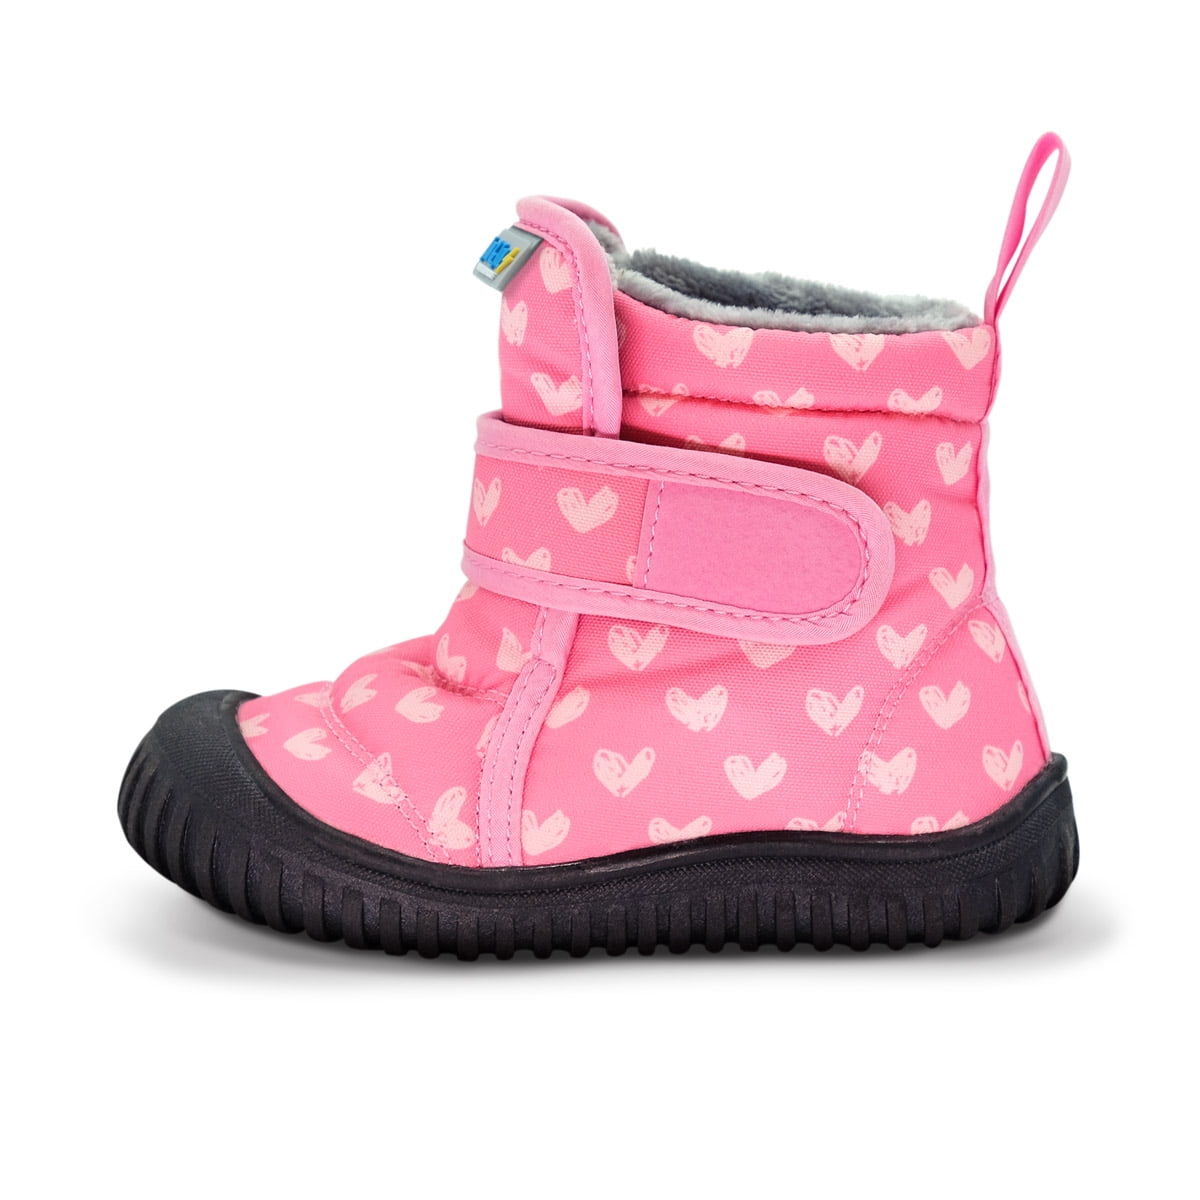 Jan & Jul Toasty-Dry Waterproof Booties for Spring Fall Winter for Toddler Kids 